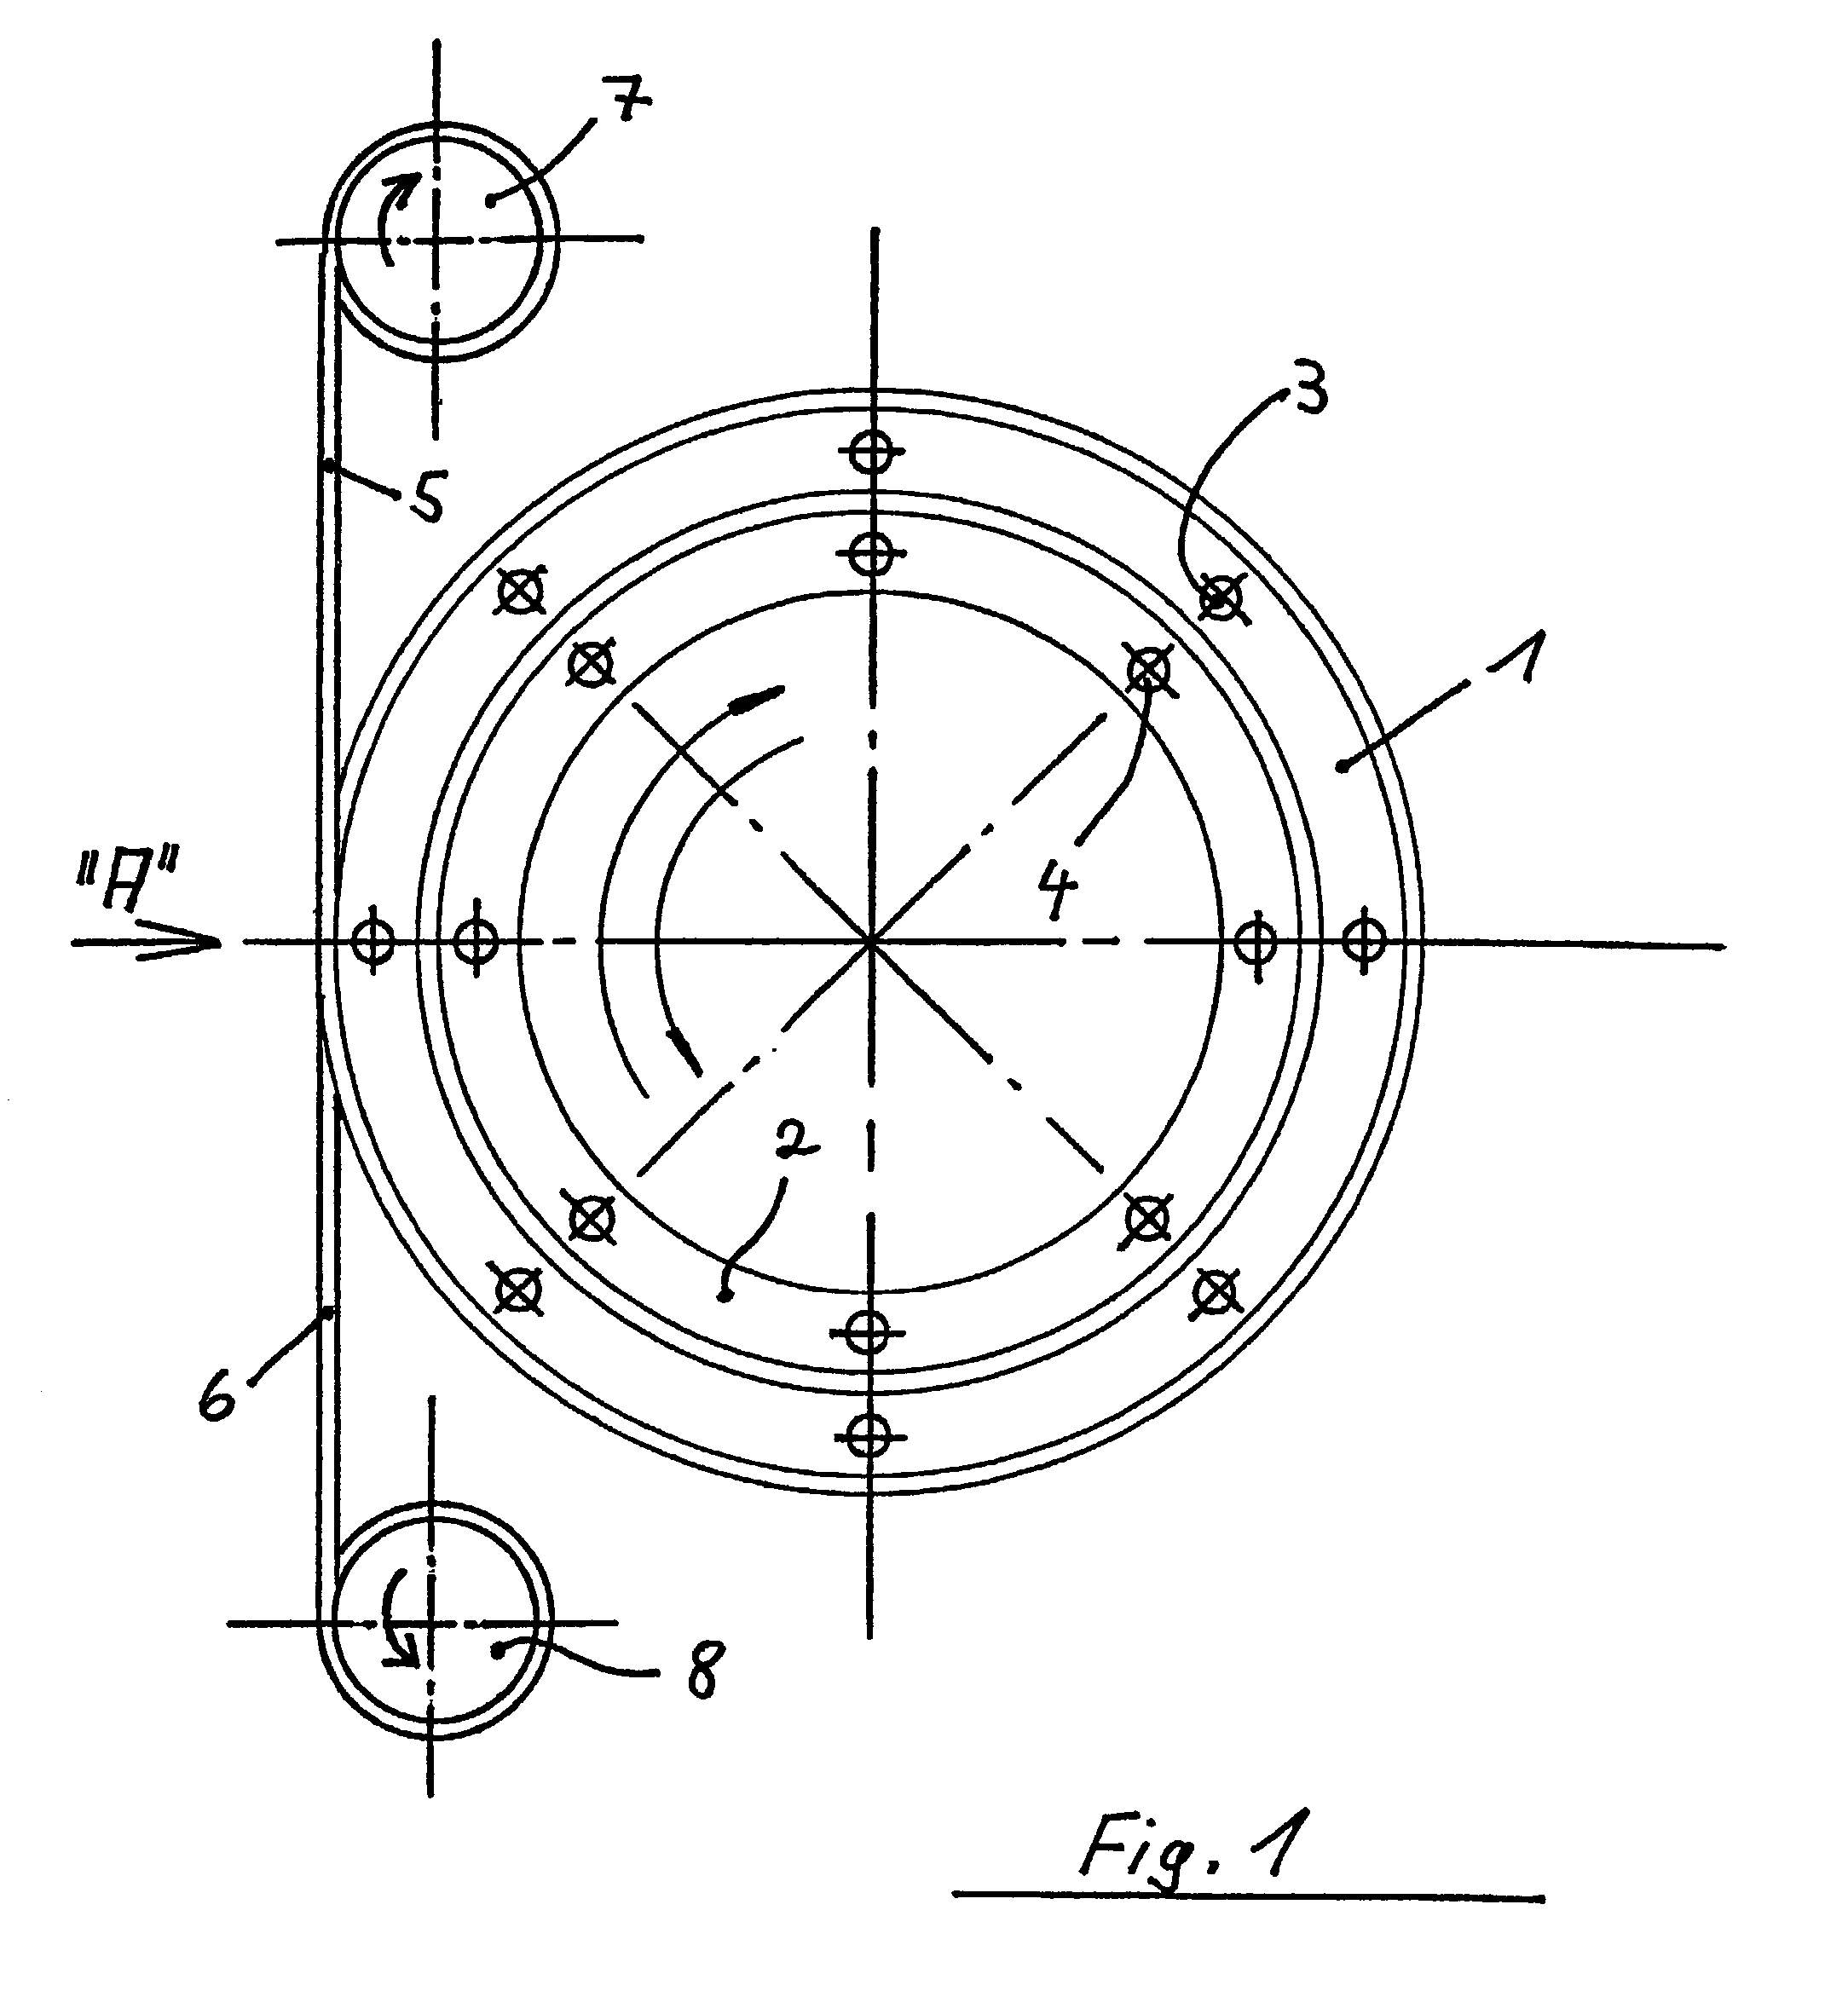 Rotary joint mechanism